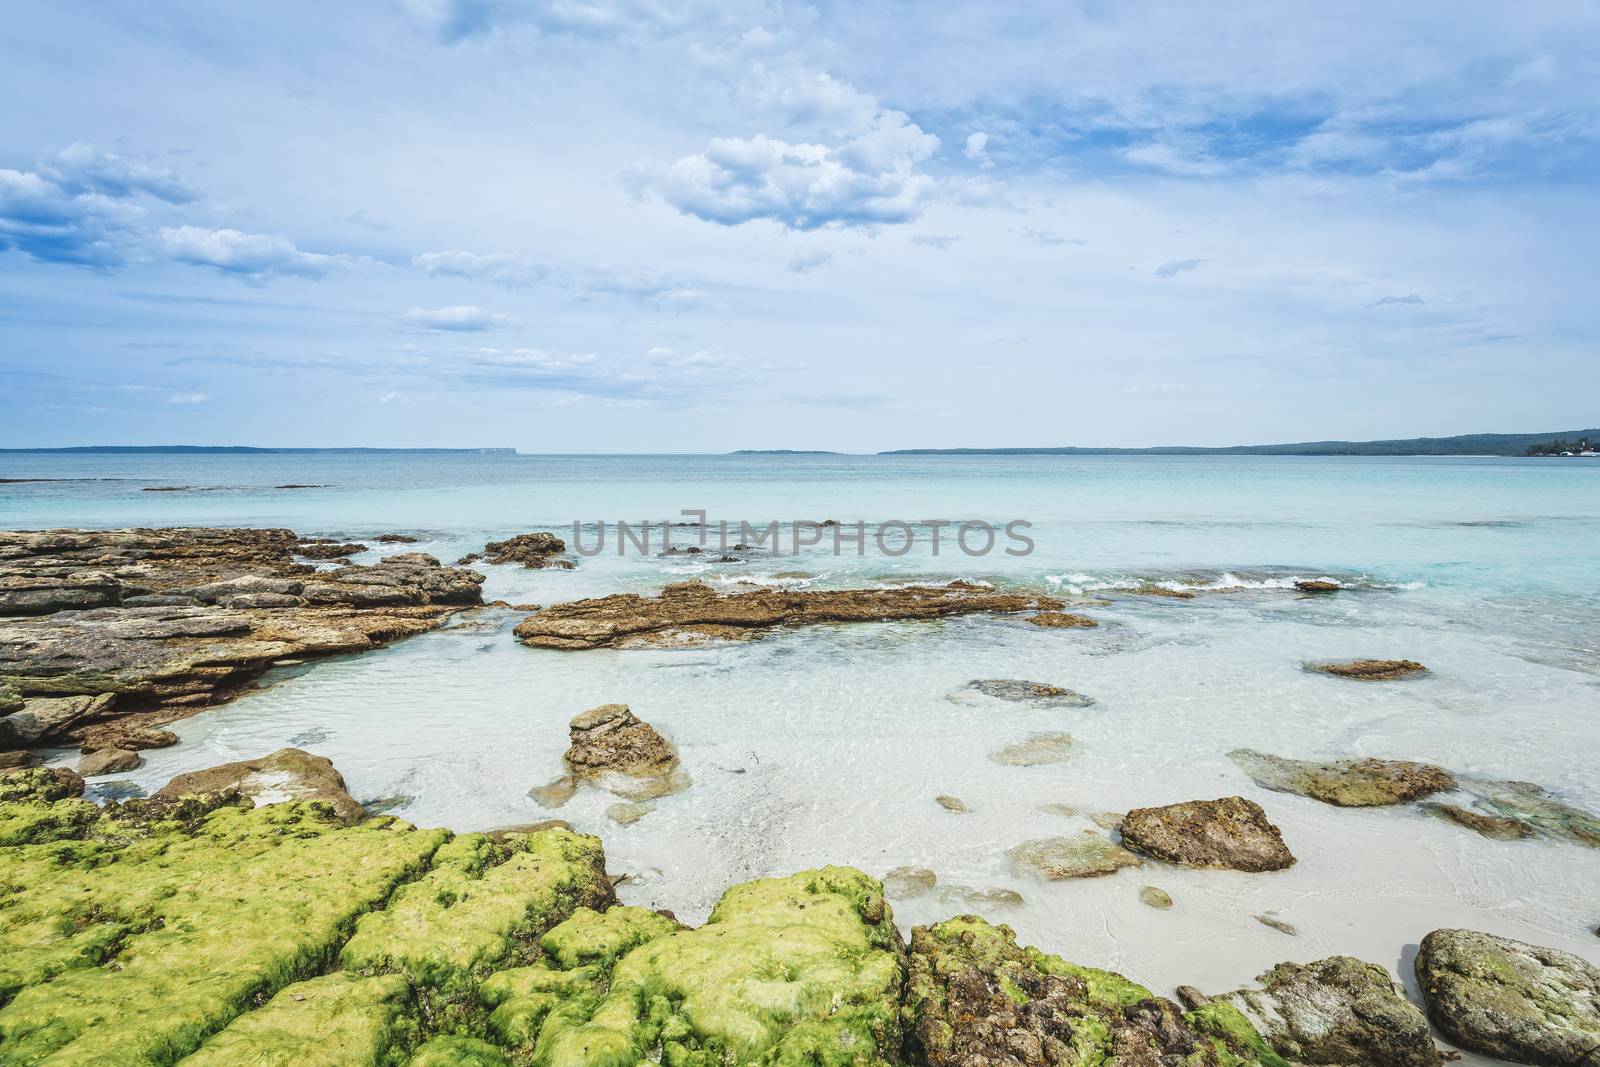 Pure white sands and aqua waters of Jervis Bay Australia